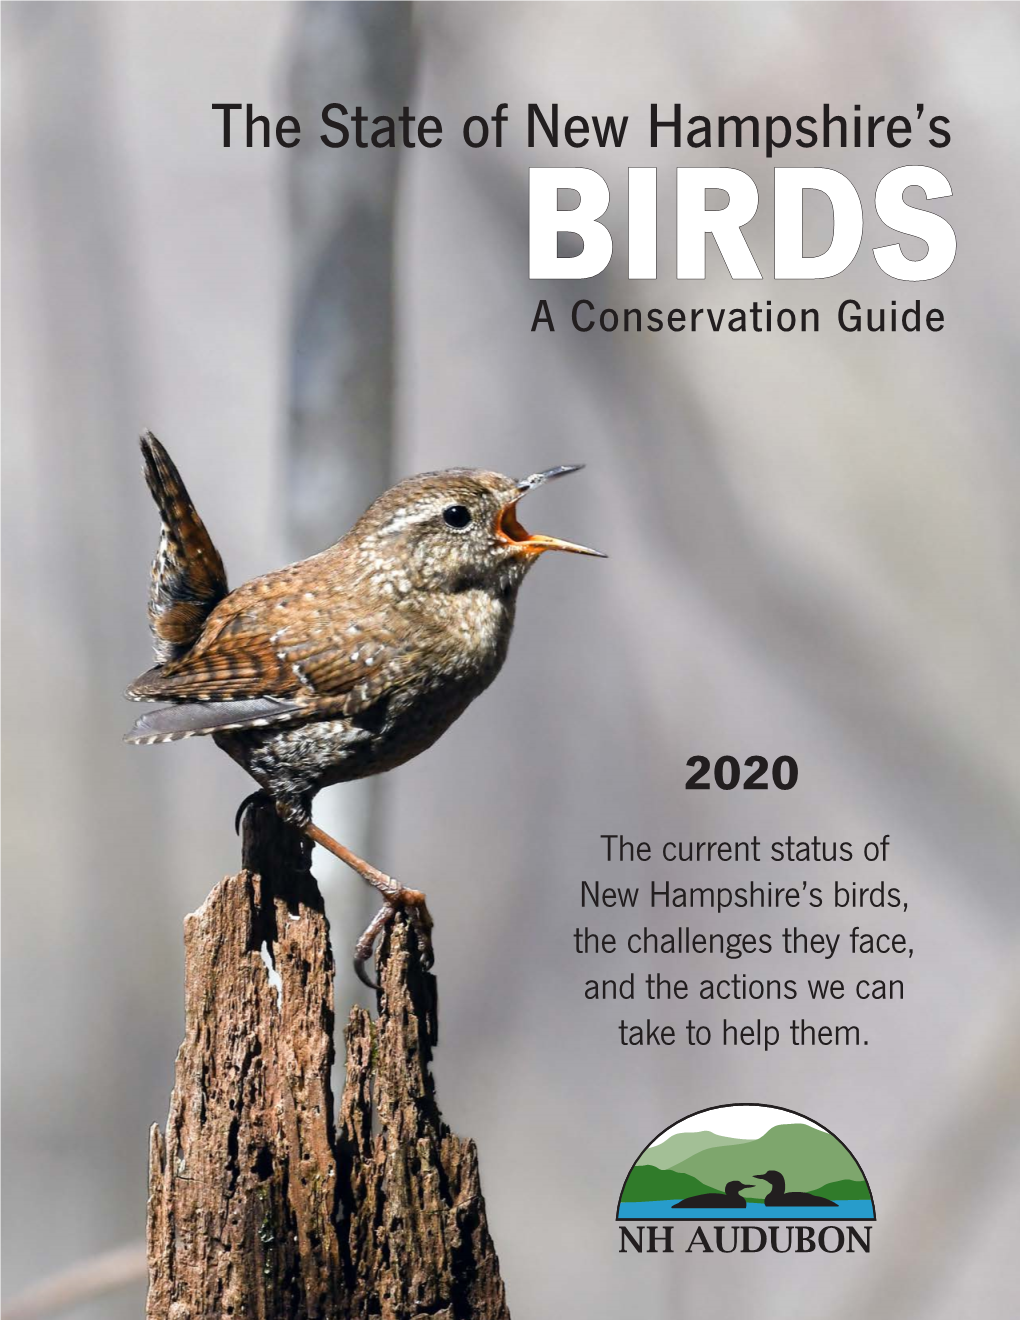 Download the 2020 State of the Birds Report